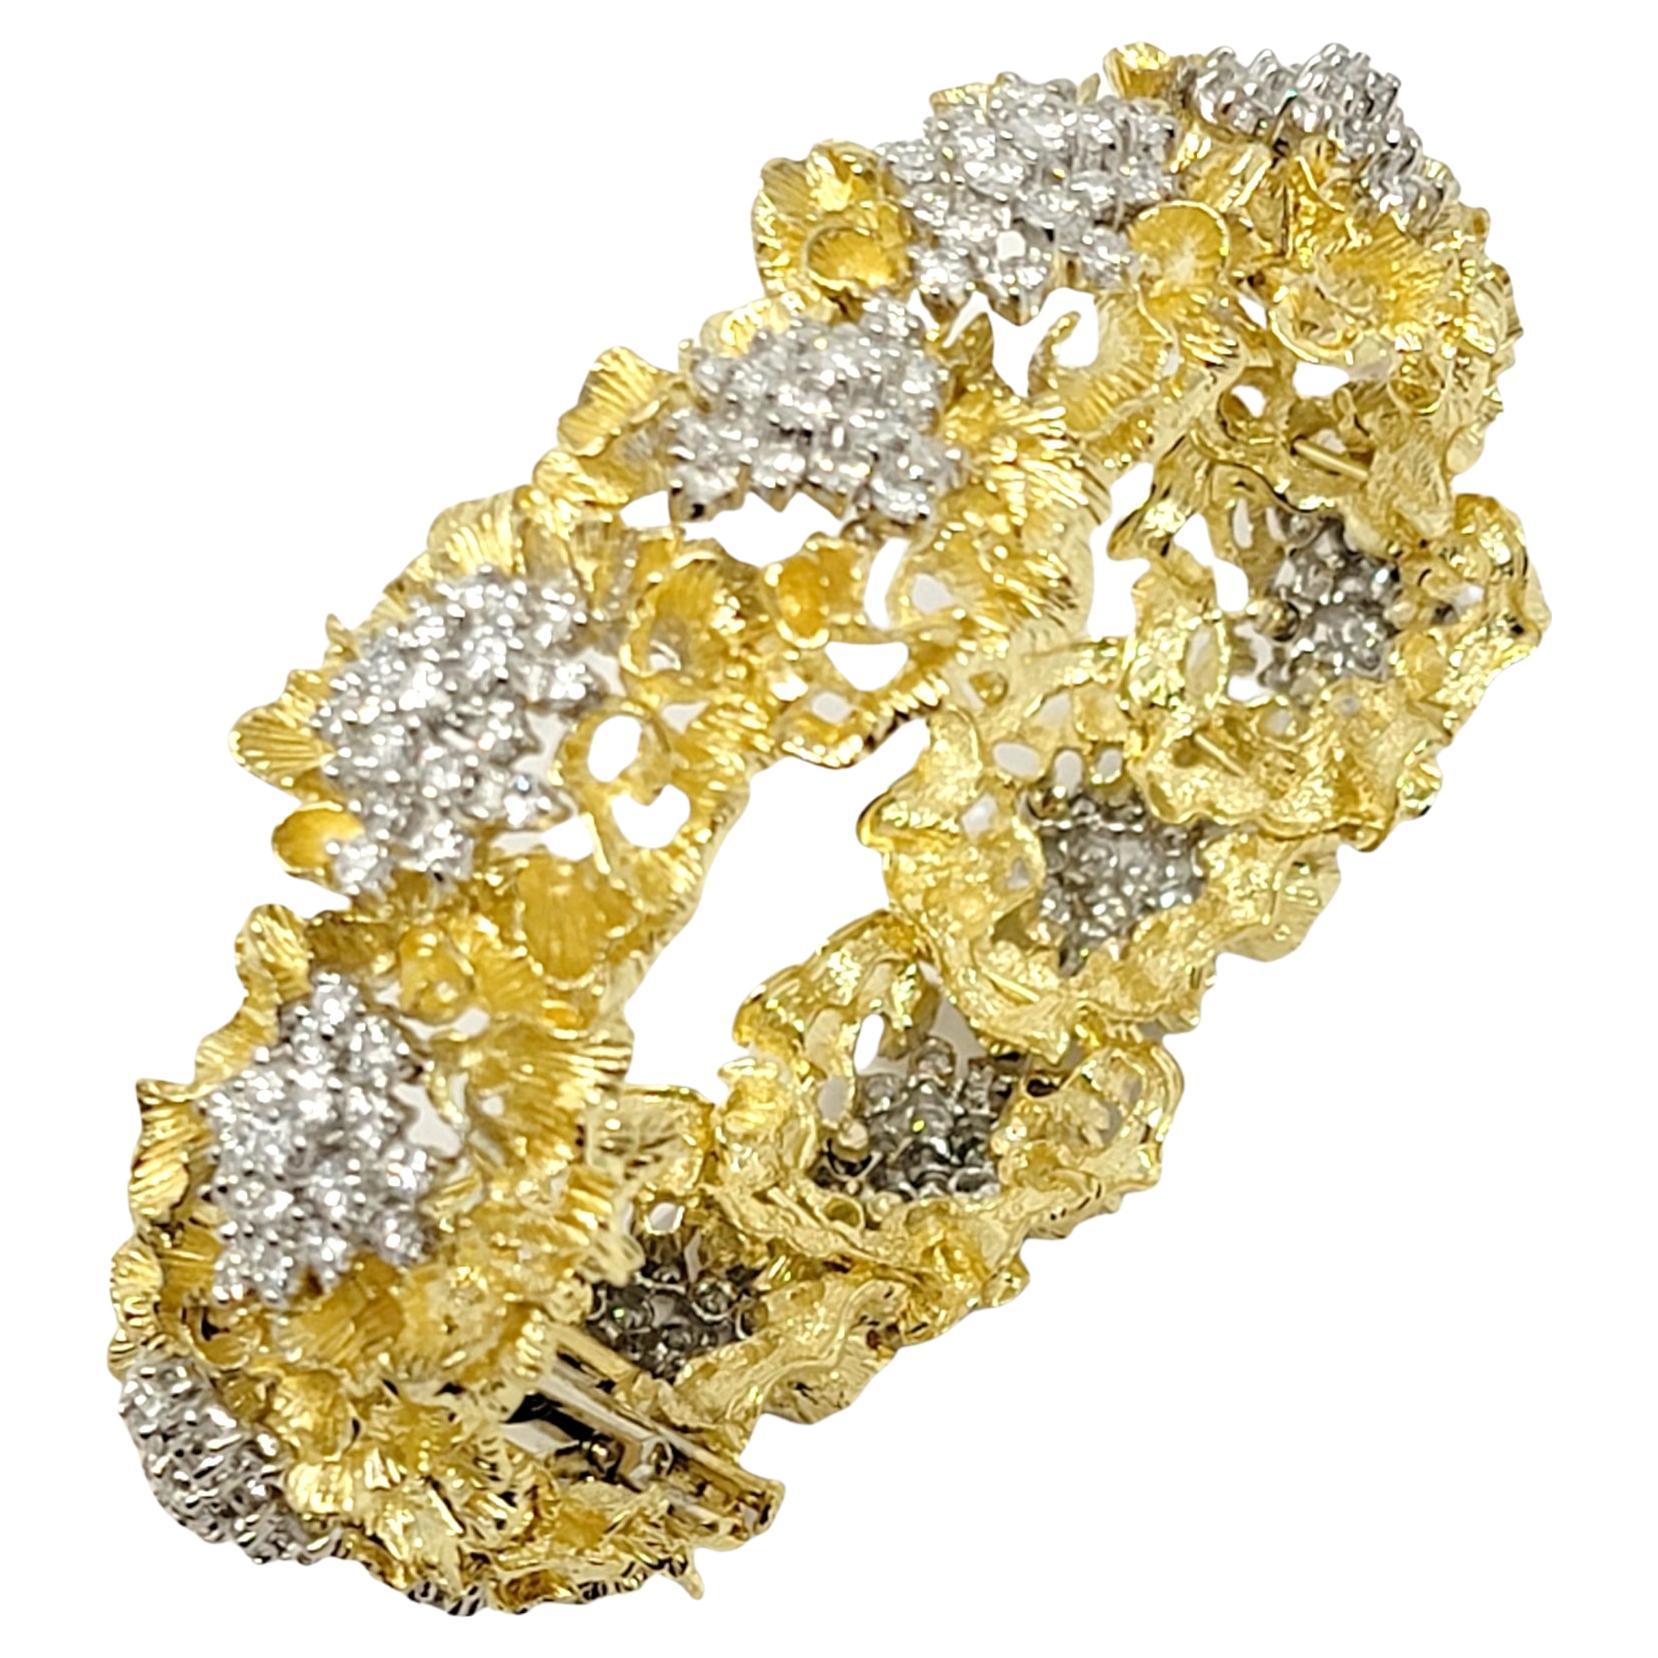 This gorgeous bracelet is made of solid 18 karat yellow gold.  It is a large, semi-rigid, open work, floral cluster motif bracelet prong set with 222 transparent, top white, round, brilliant cut, Natural Diamonds .

The gold work is unique, with a